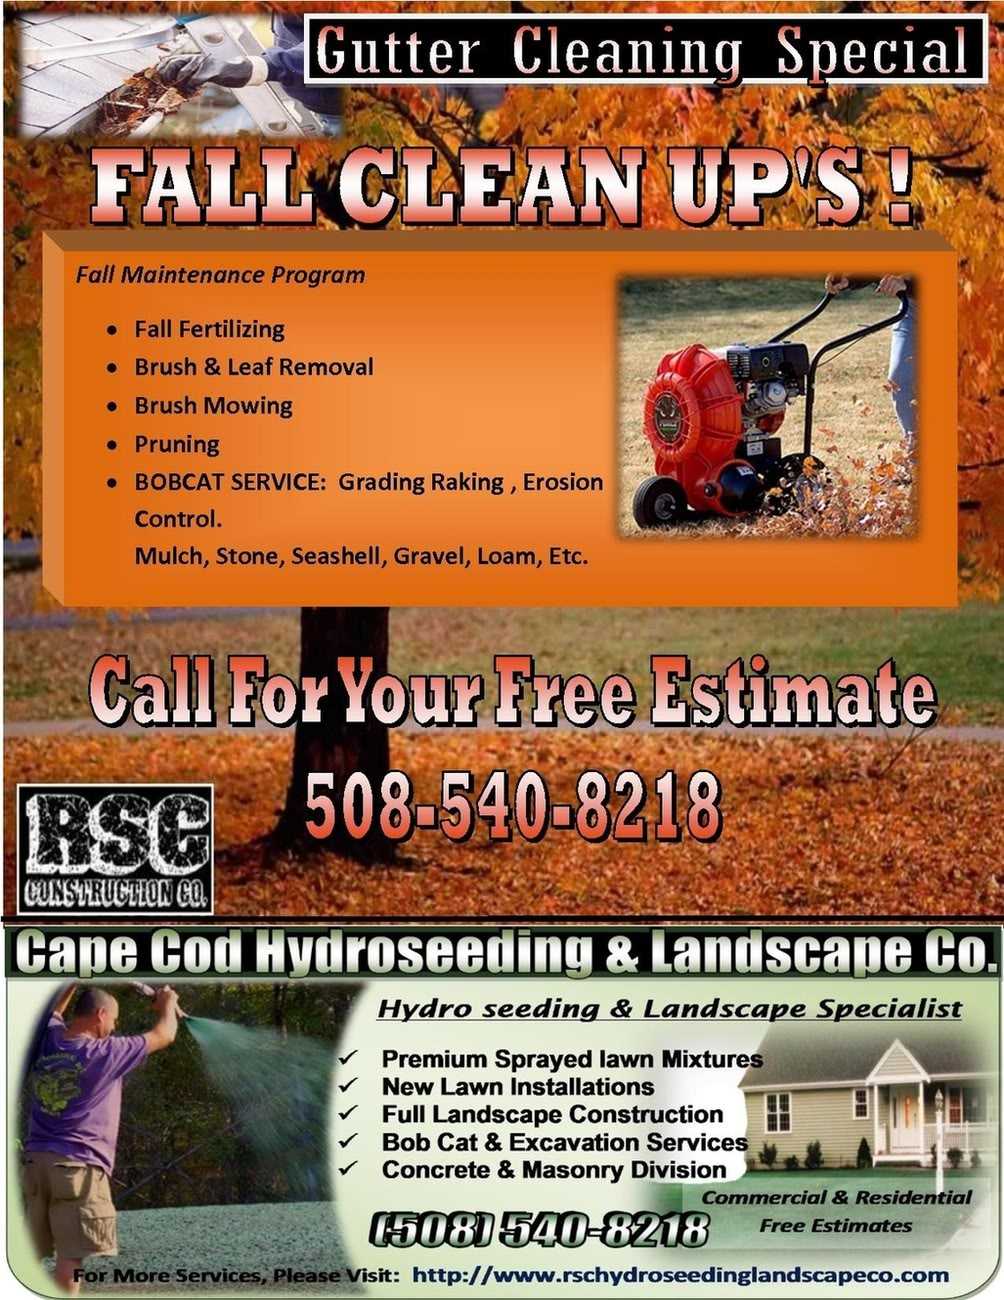 Leaf Clean Up Flyers - Tunu.redmini.co Intended For Fall Clean Up Flyer Template